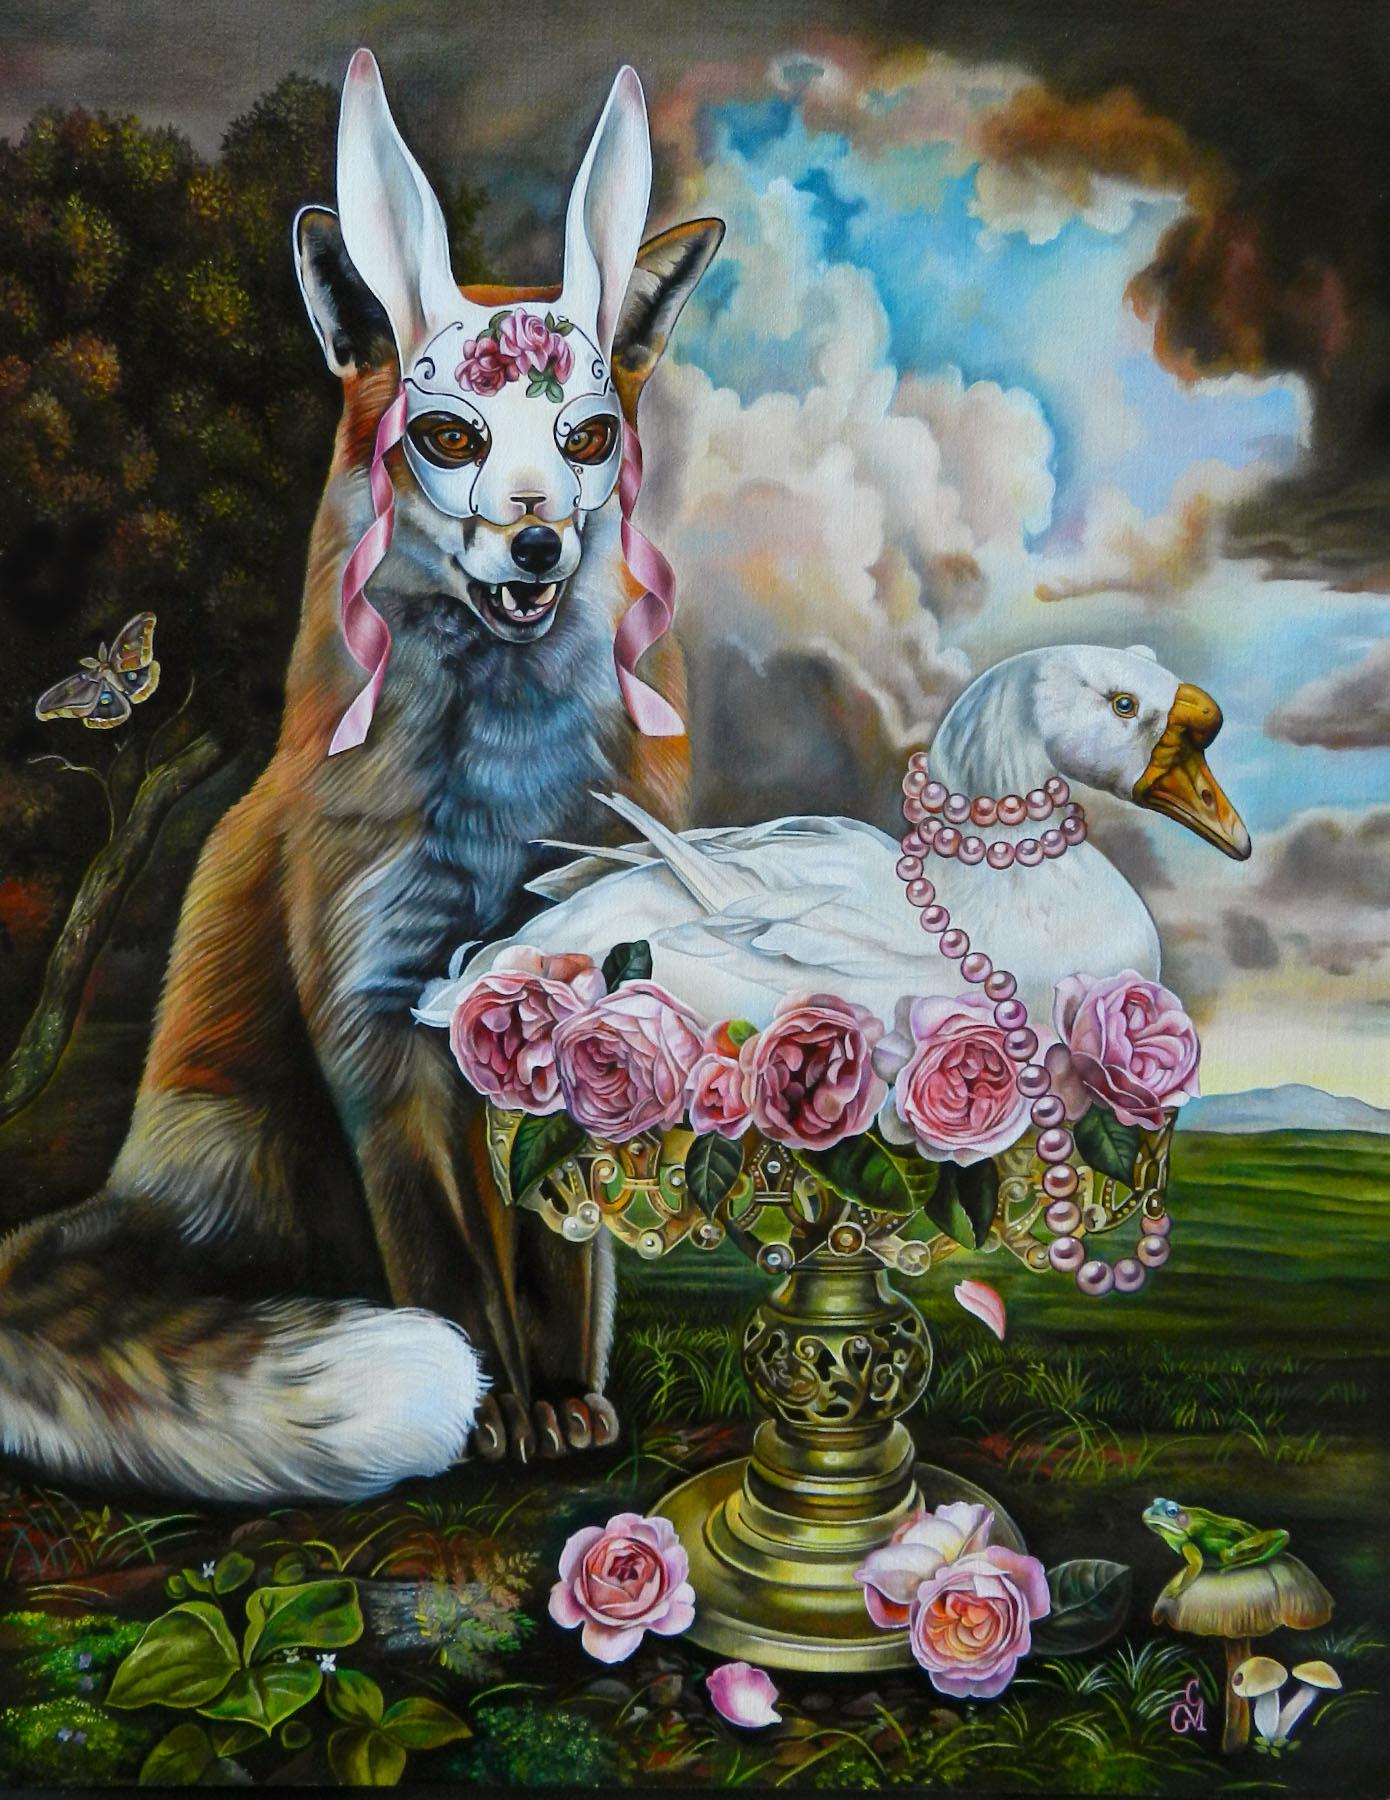 Animal Painting Claudia Griesbach-Martucci - ""The Uninvited Entertainer"" Peinture à l'huile